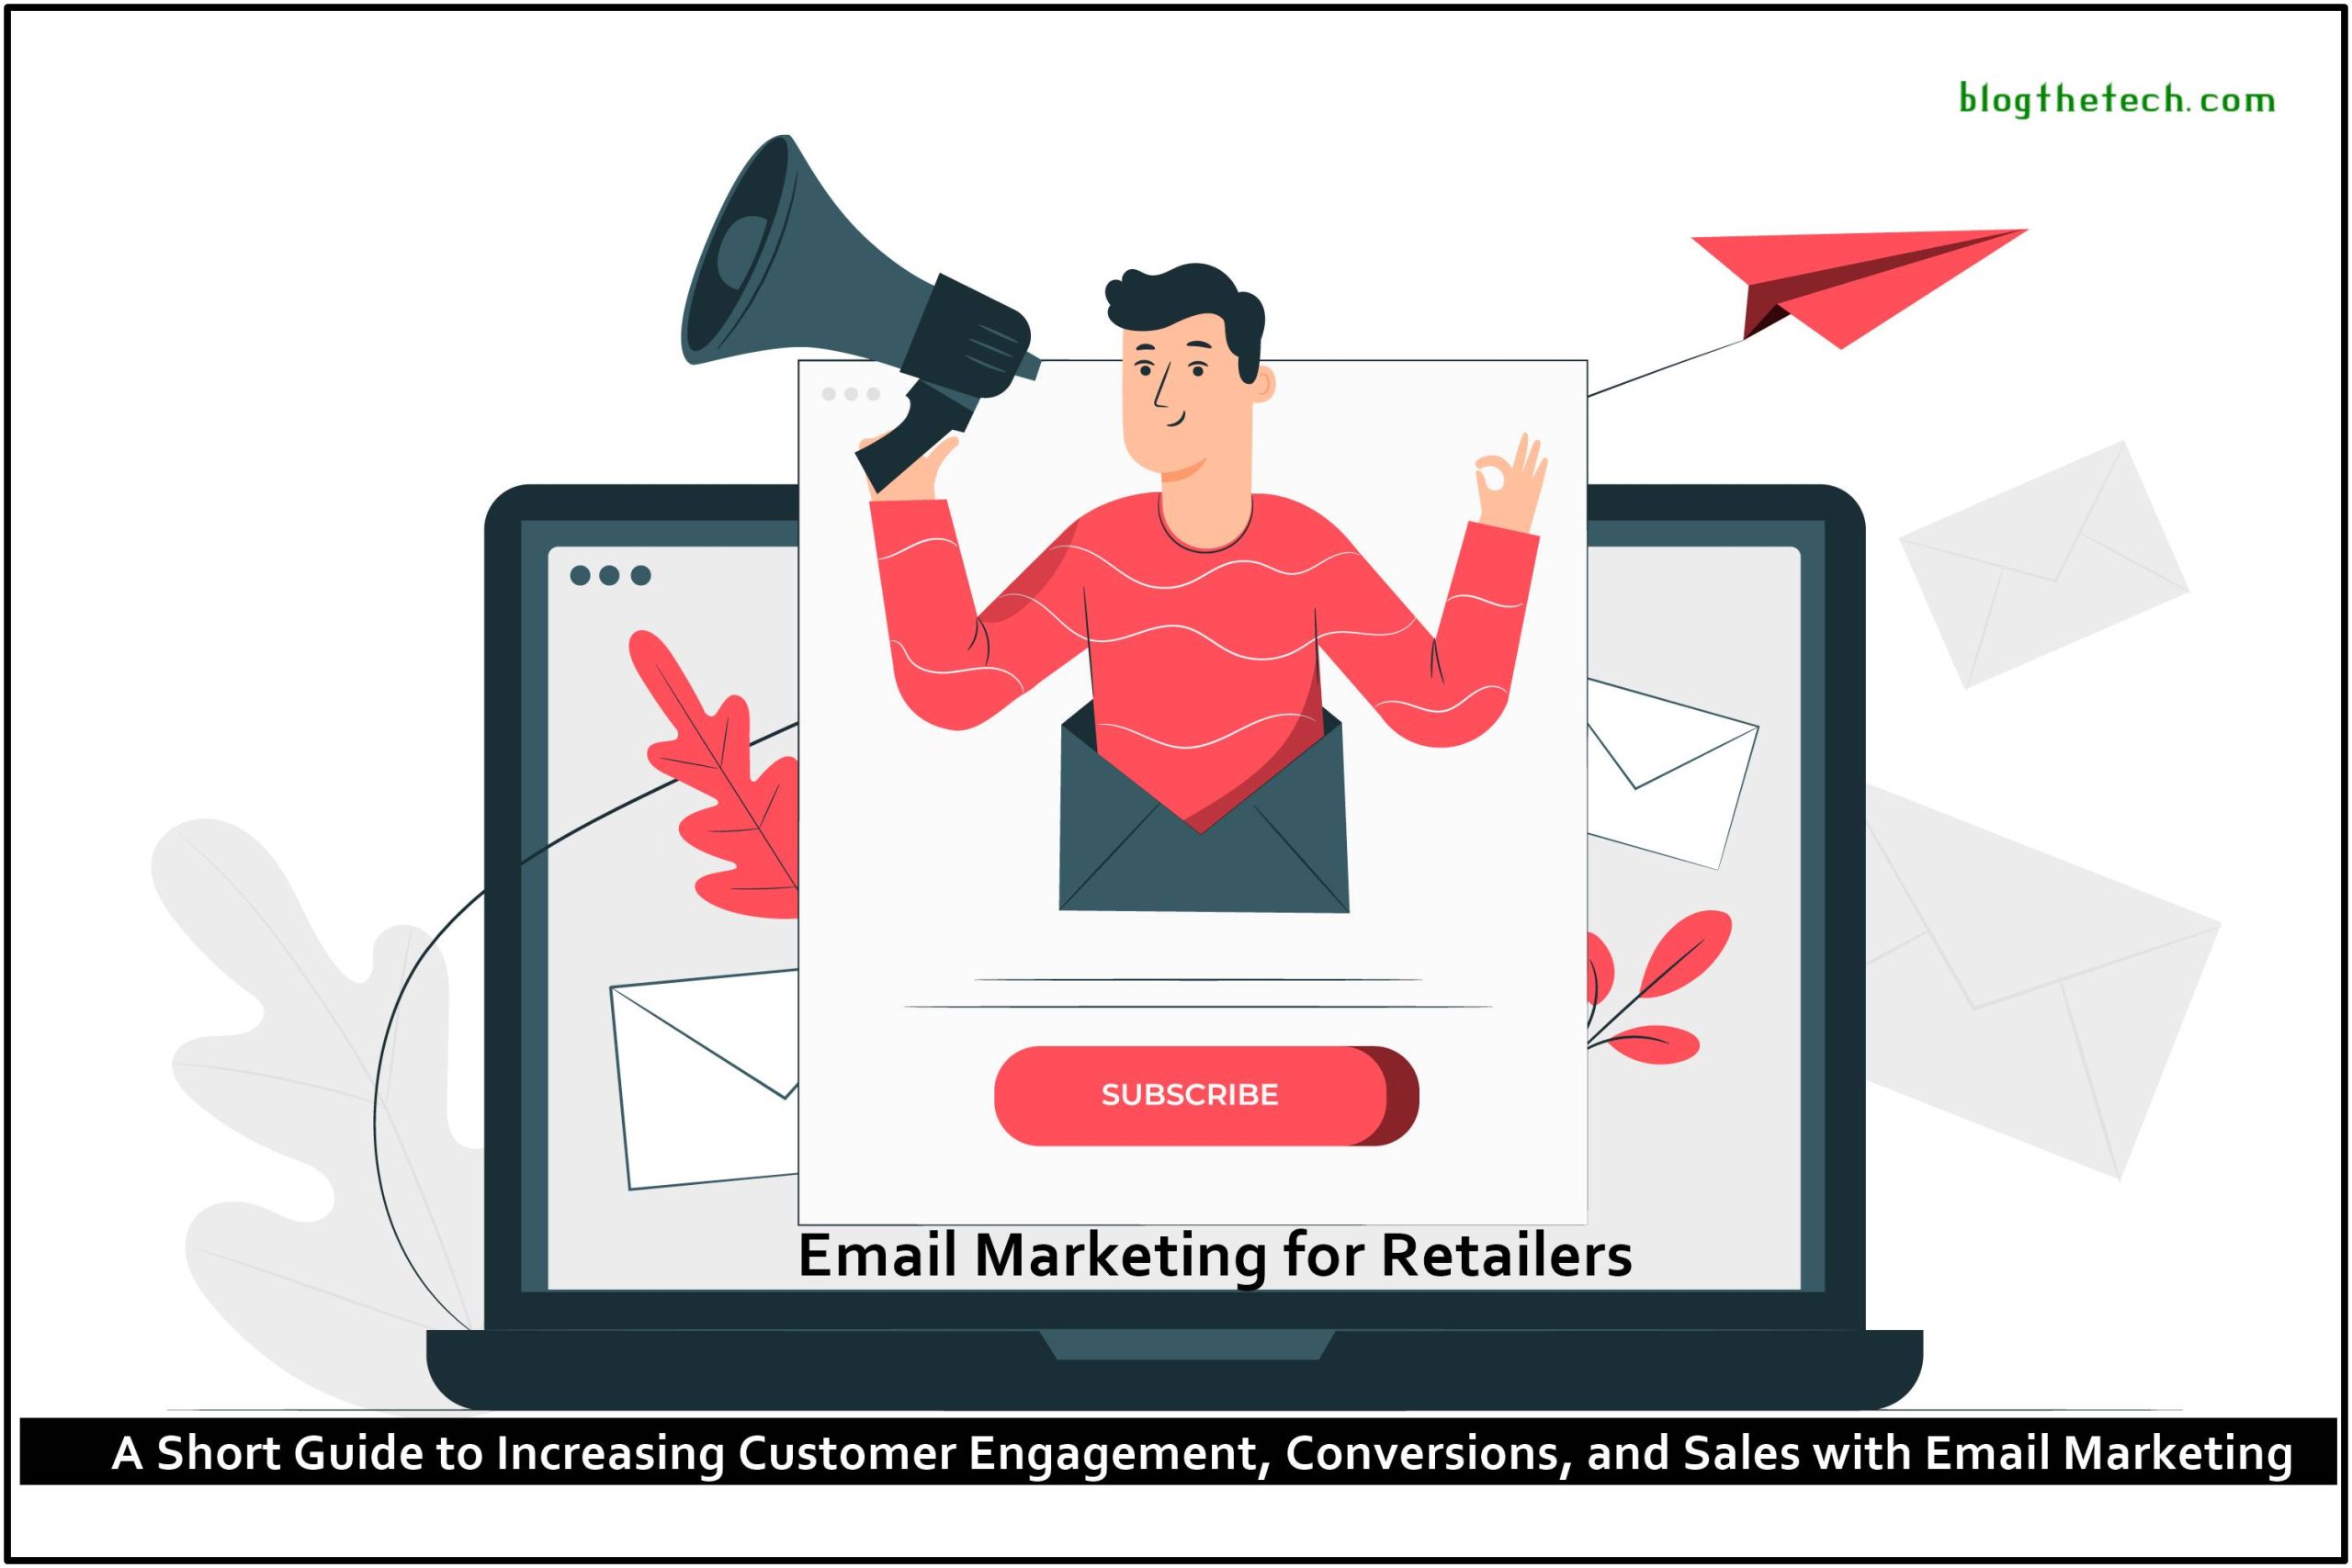 Email Marketing for Retailers: A Short Guide to Increasing Customer Engagement, Conversions, and Sales with Email Marketing